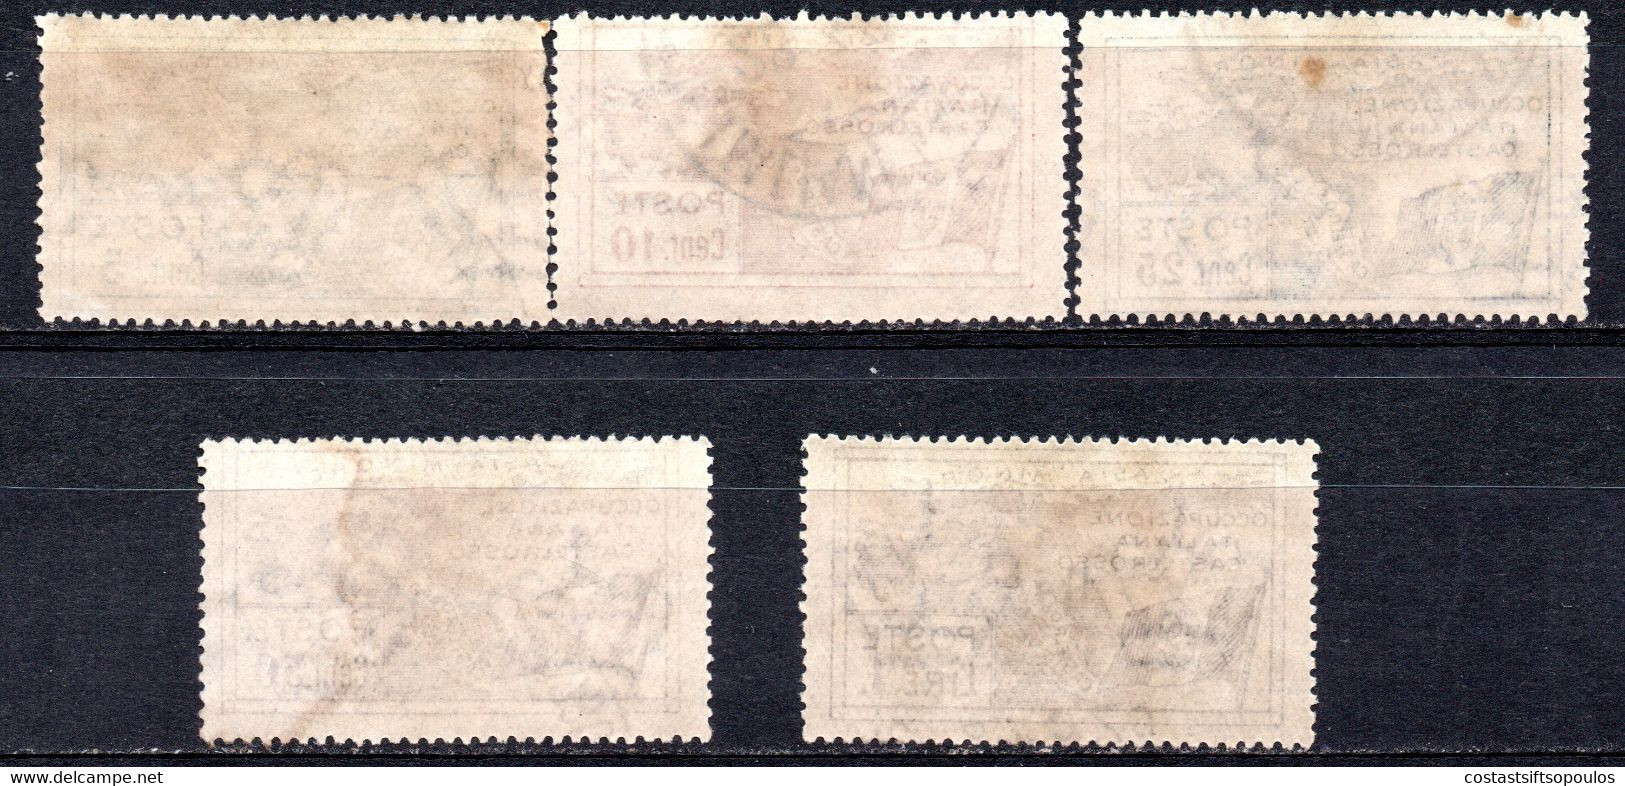 1441.GREECE,ITALY, DODECANESE.KASTELLORIZO,CASTELROSSO. 1923 HELLAS 26-30.FREE SHIPPING BY REGISTERED MAIL. - Dodecaneso